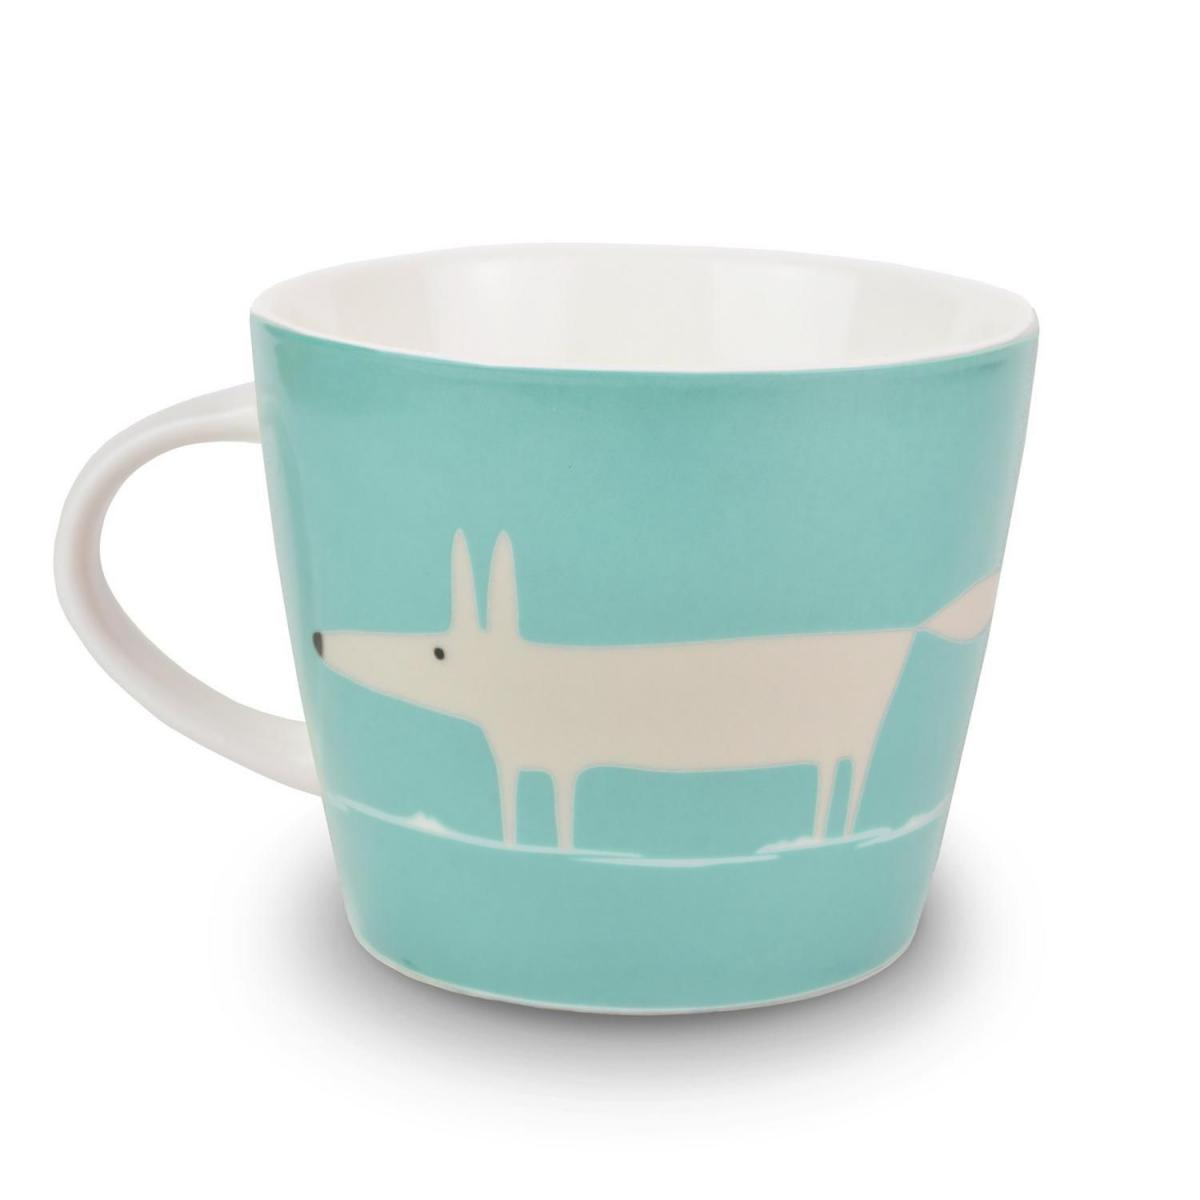  Mugs And Cups SC-0131 